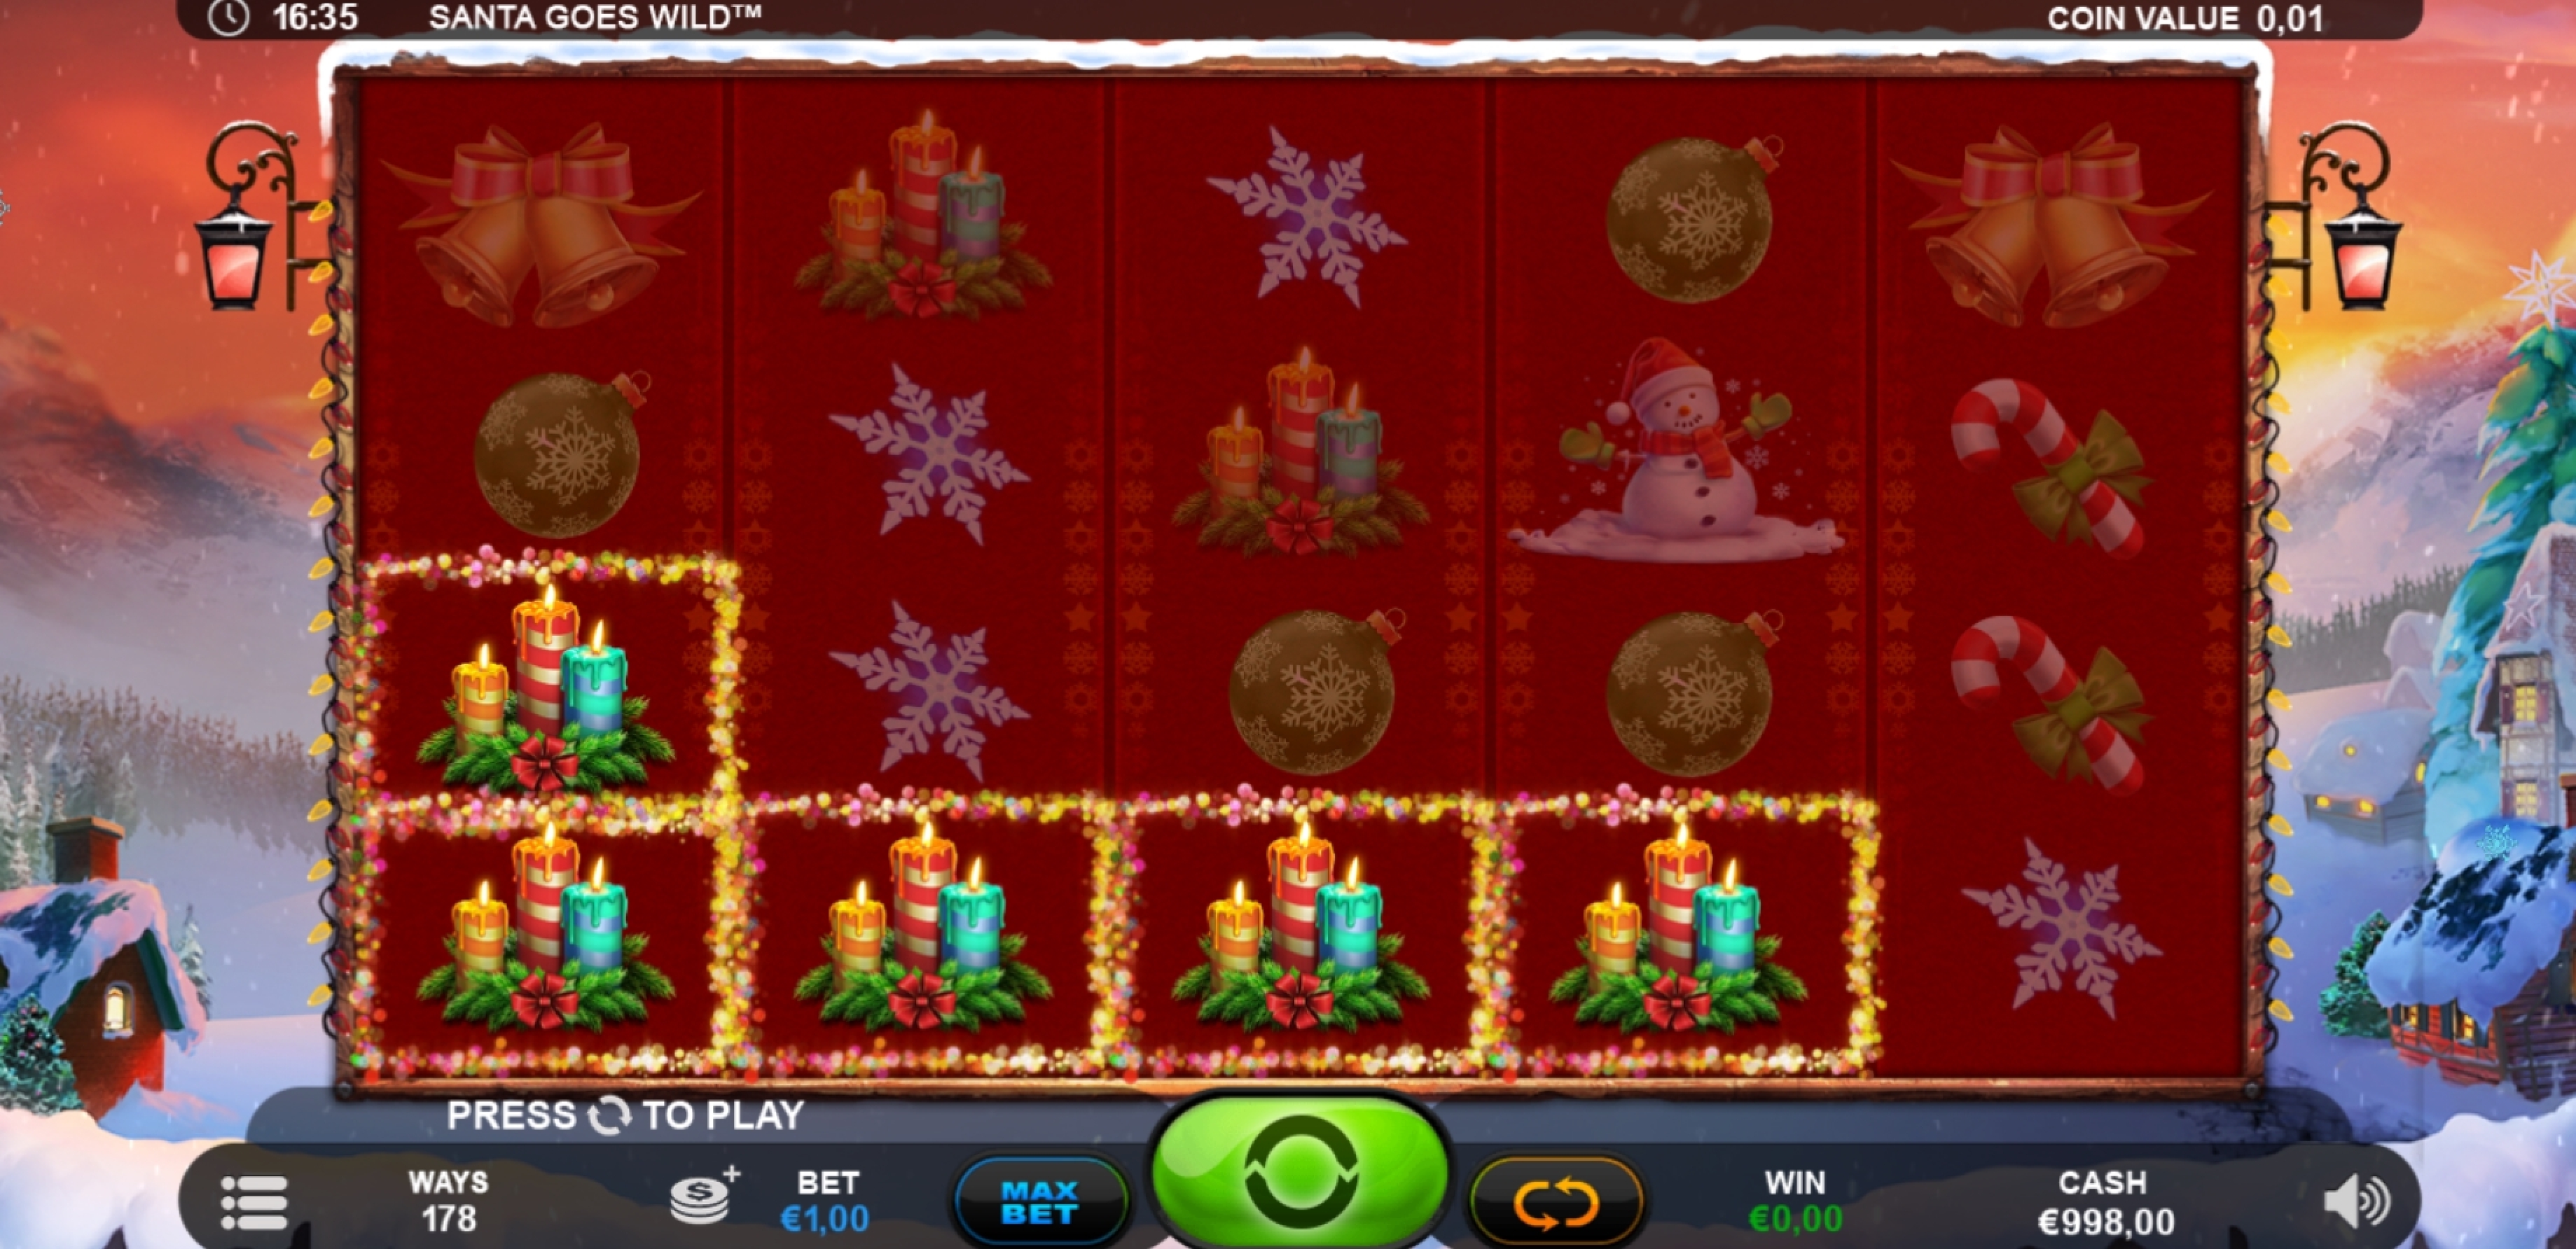 Win Money in Santa Goes Wild Free Slot Game by Plank Gaming